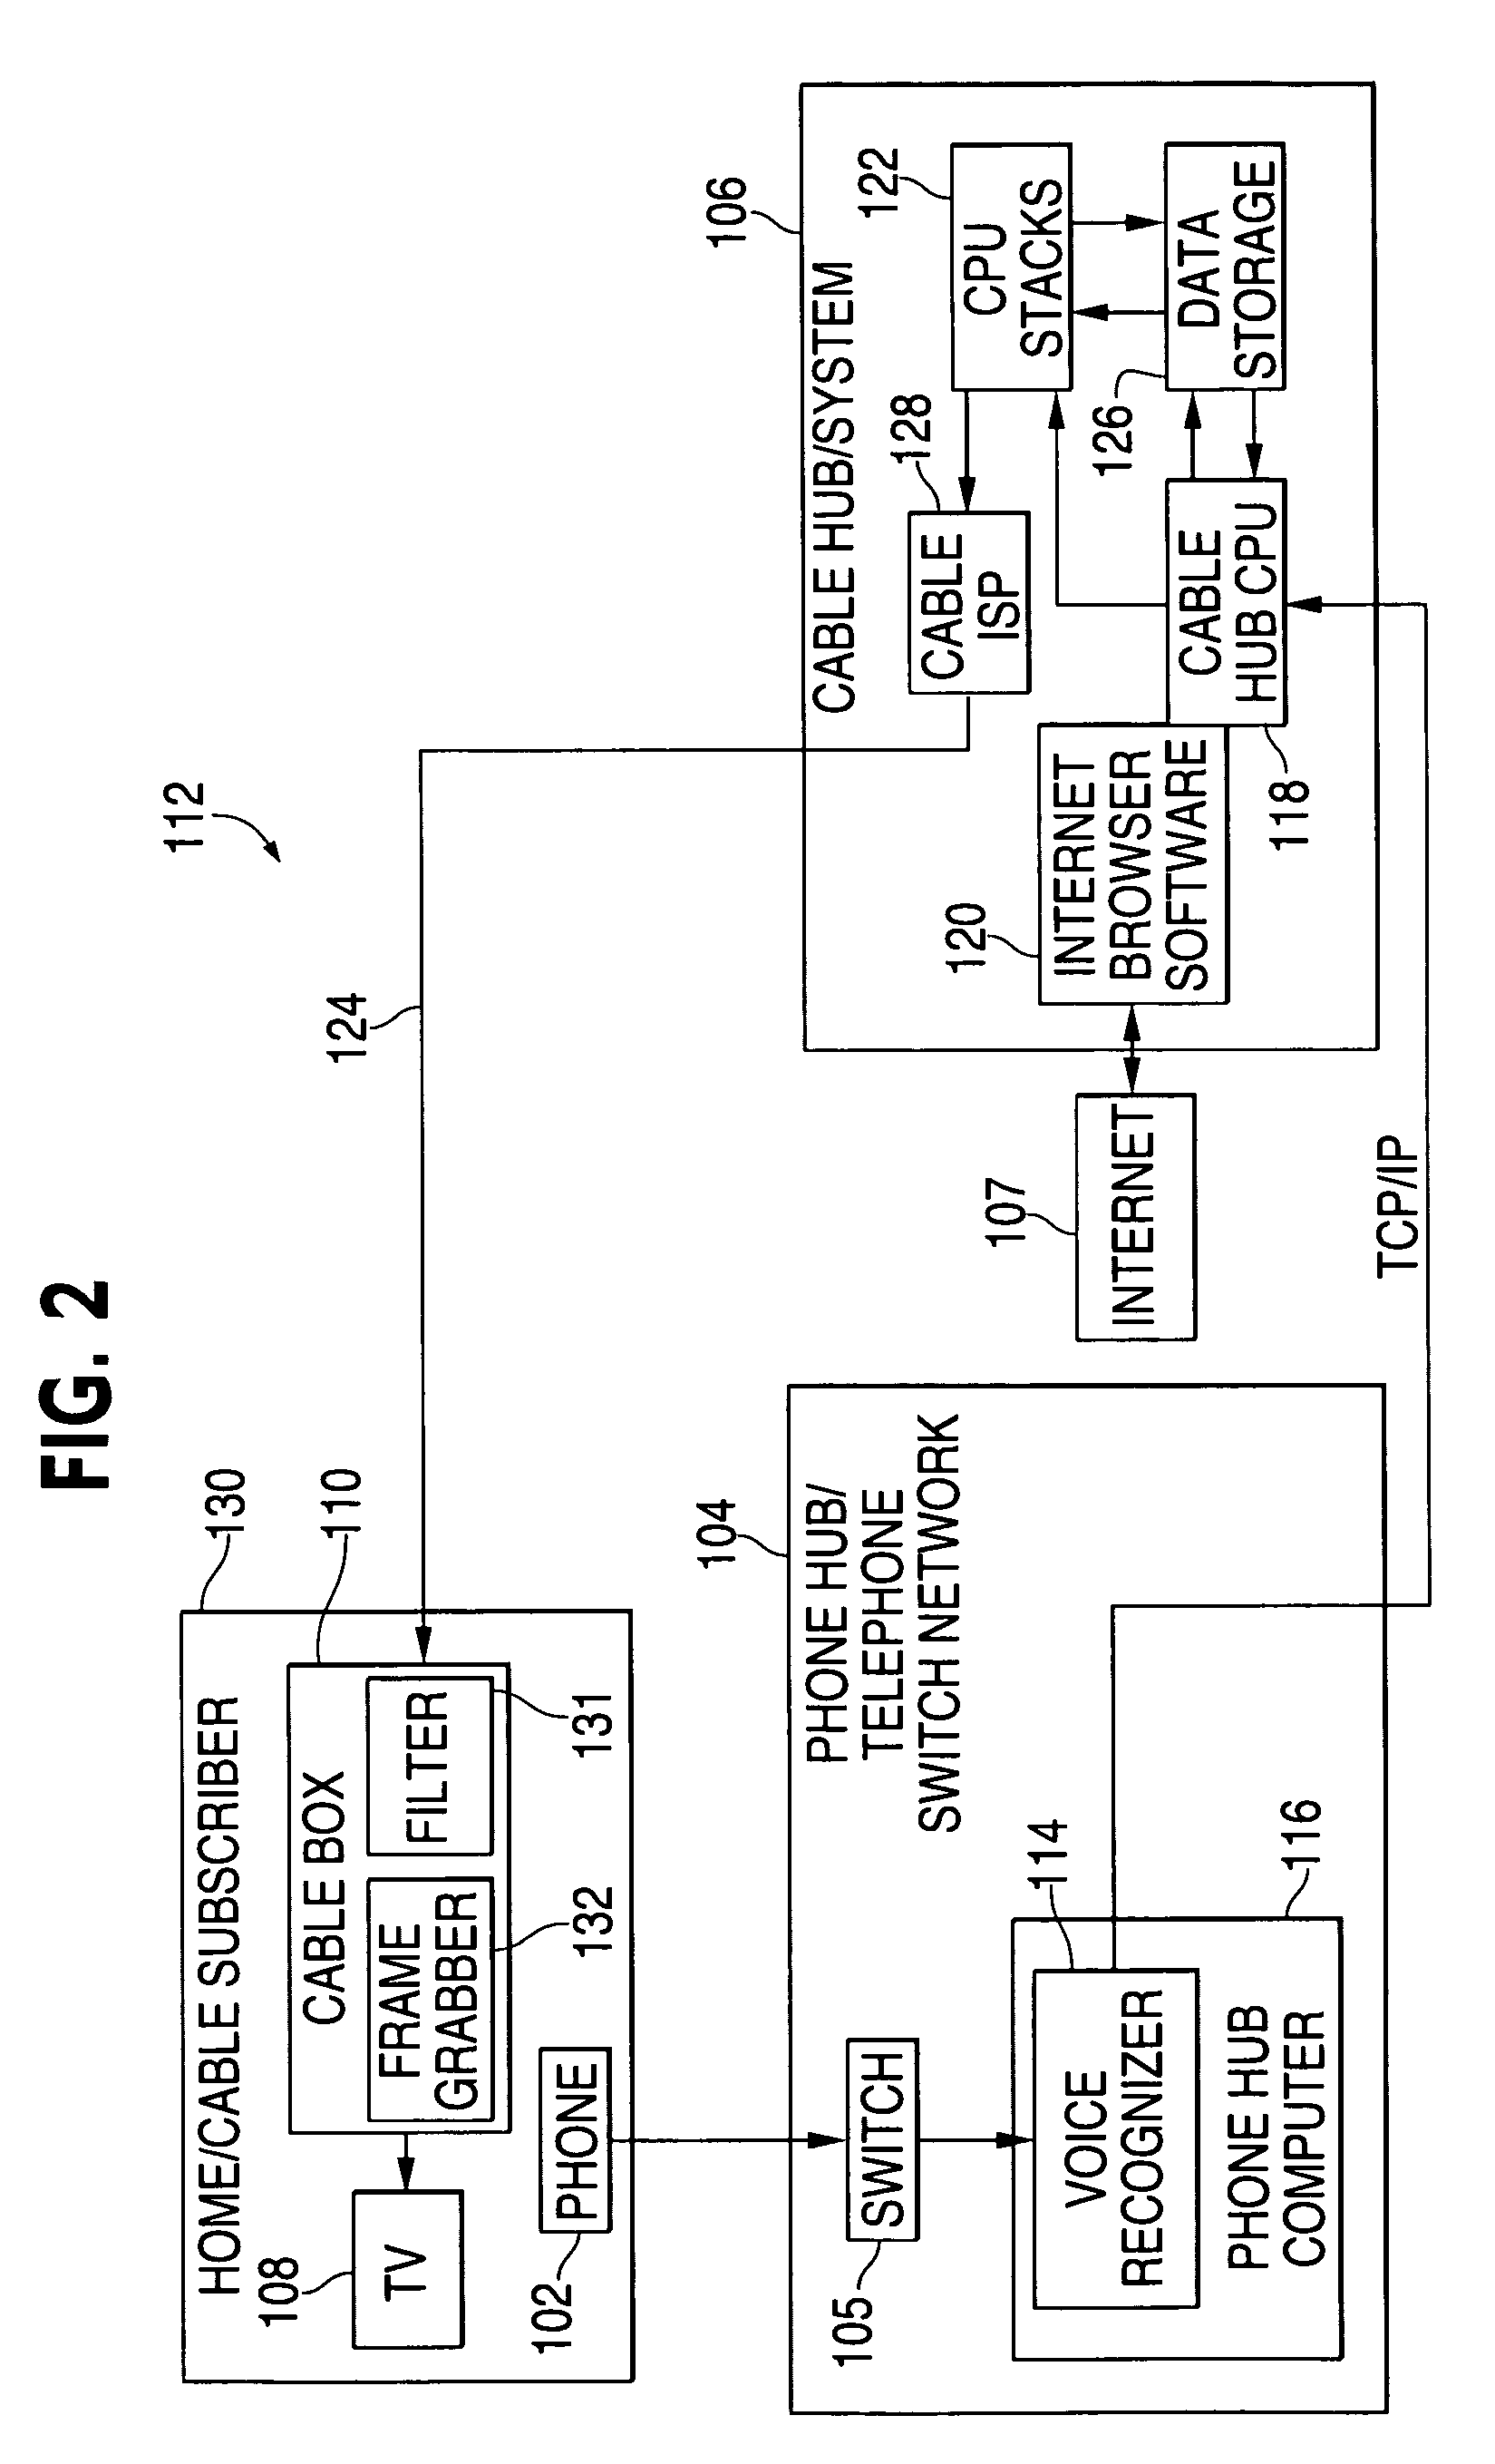 Method and apparatus for internet TV